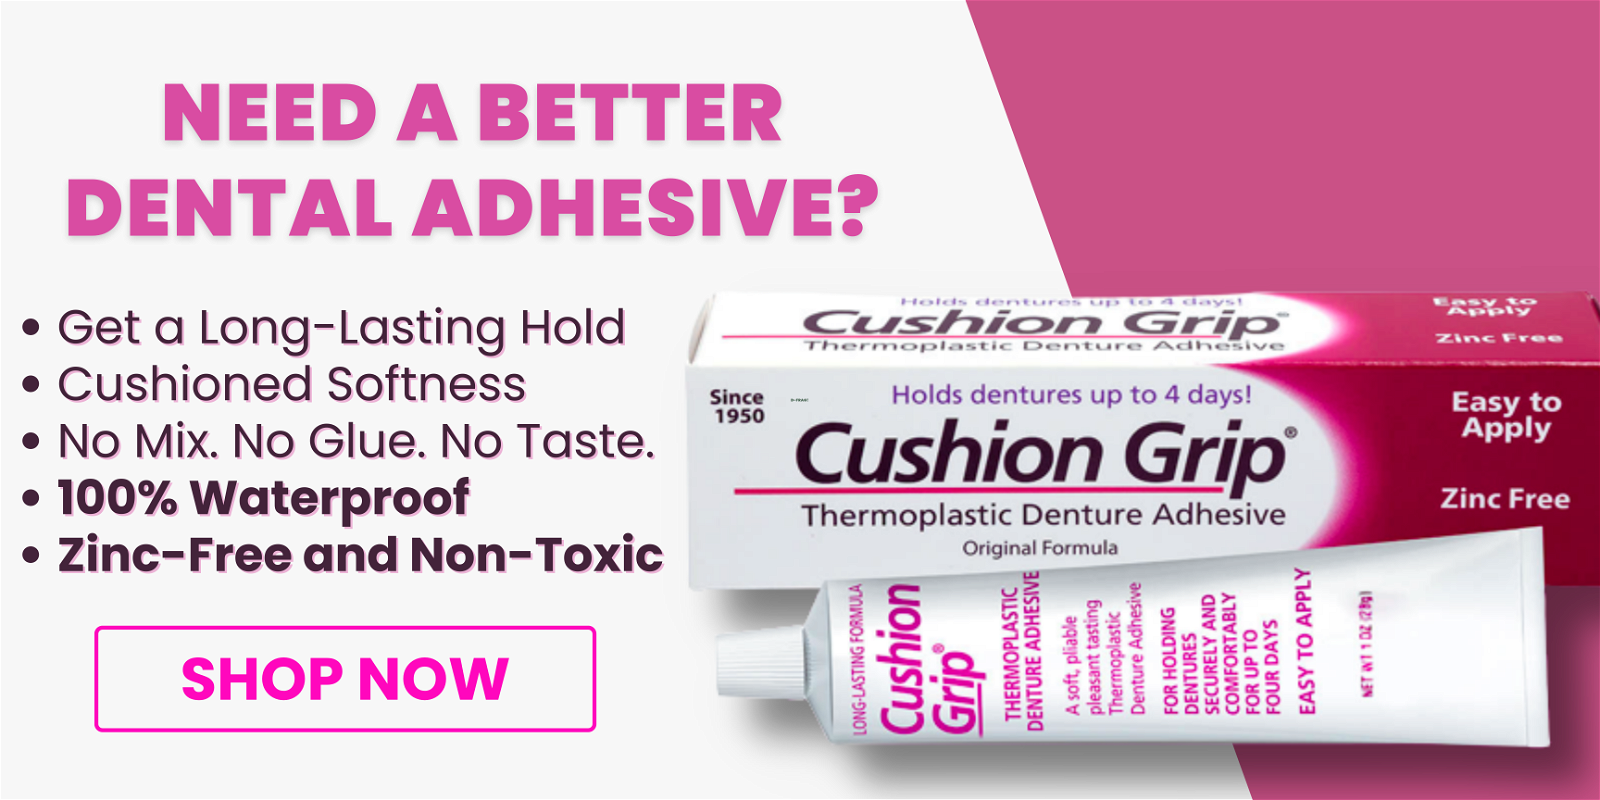  Cushion Grip Thermoplastic Denture Adhesive - 1 oz by